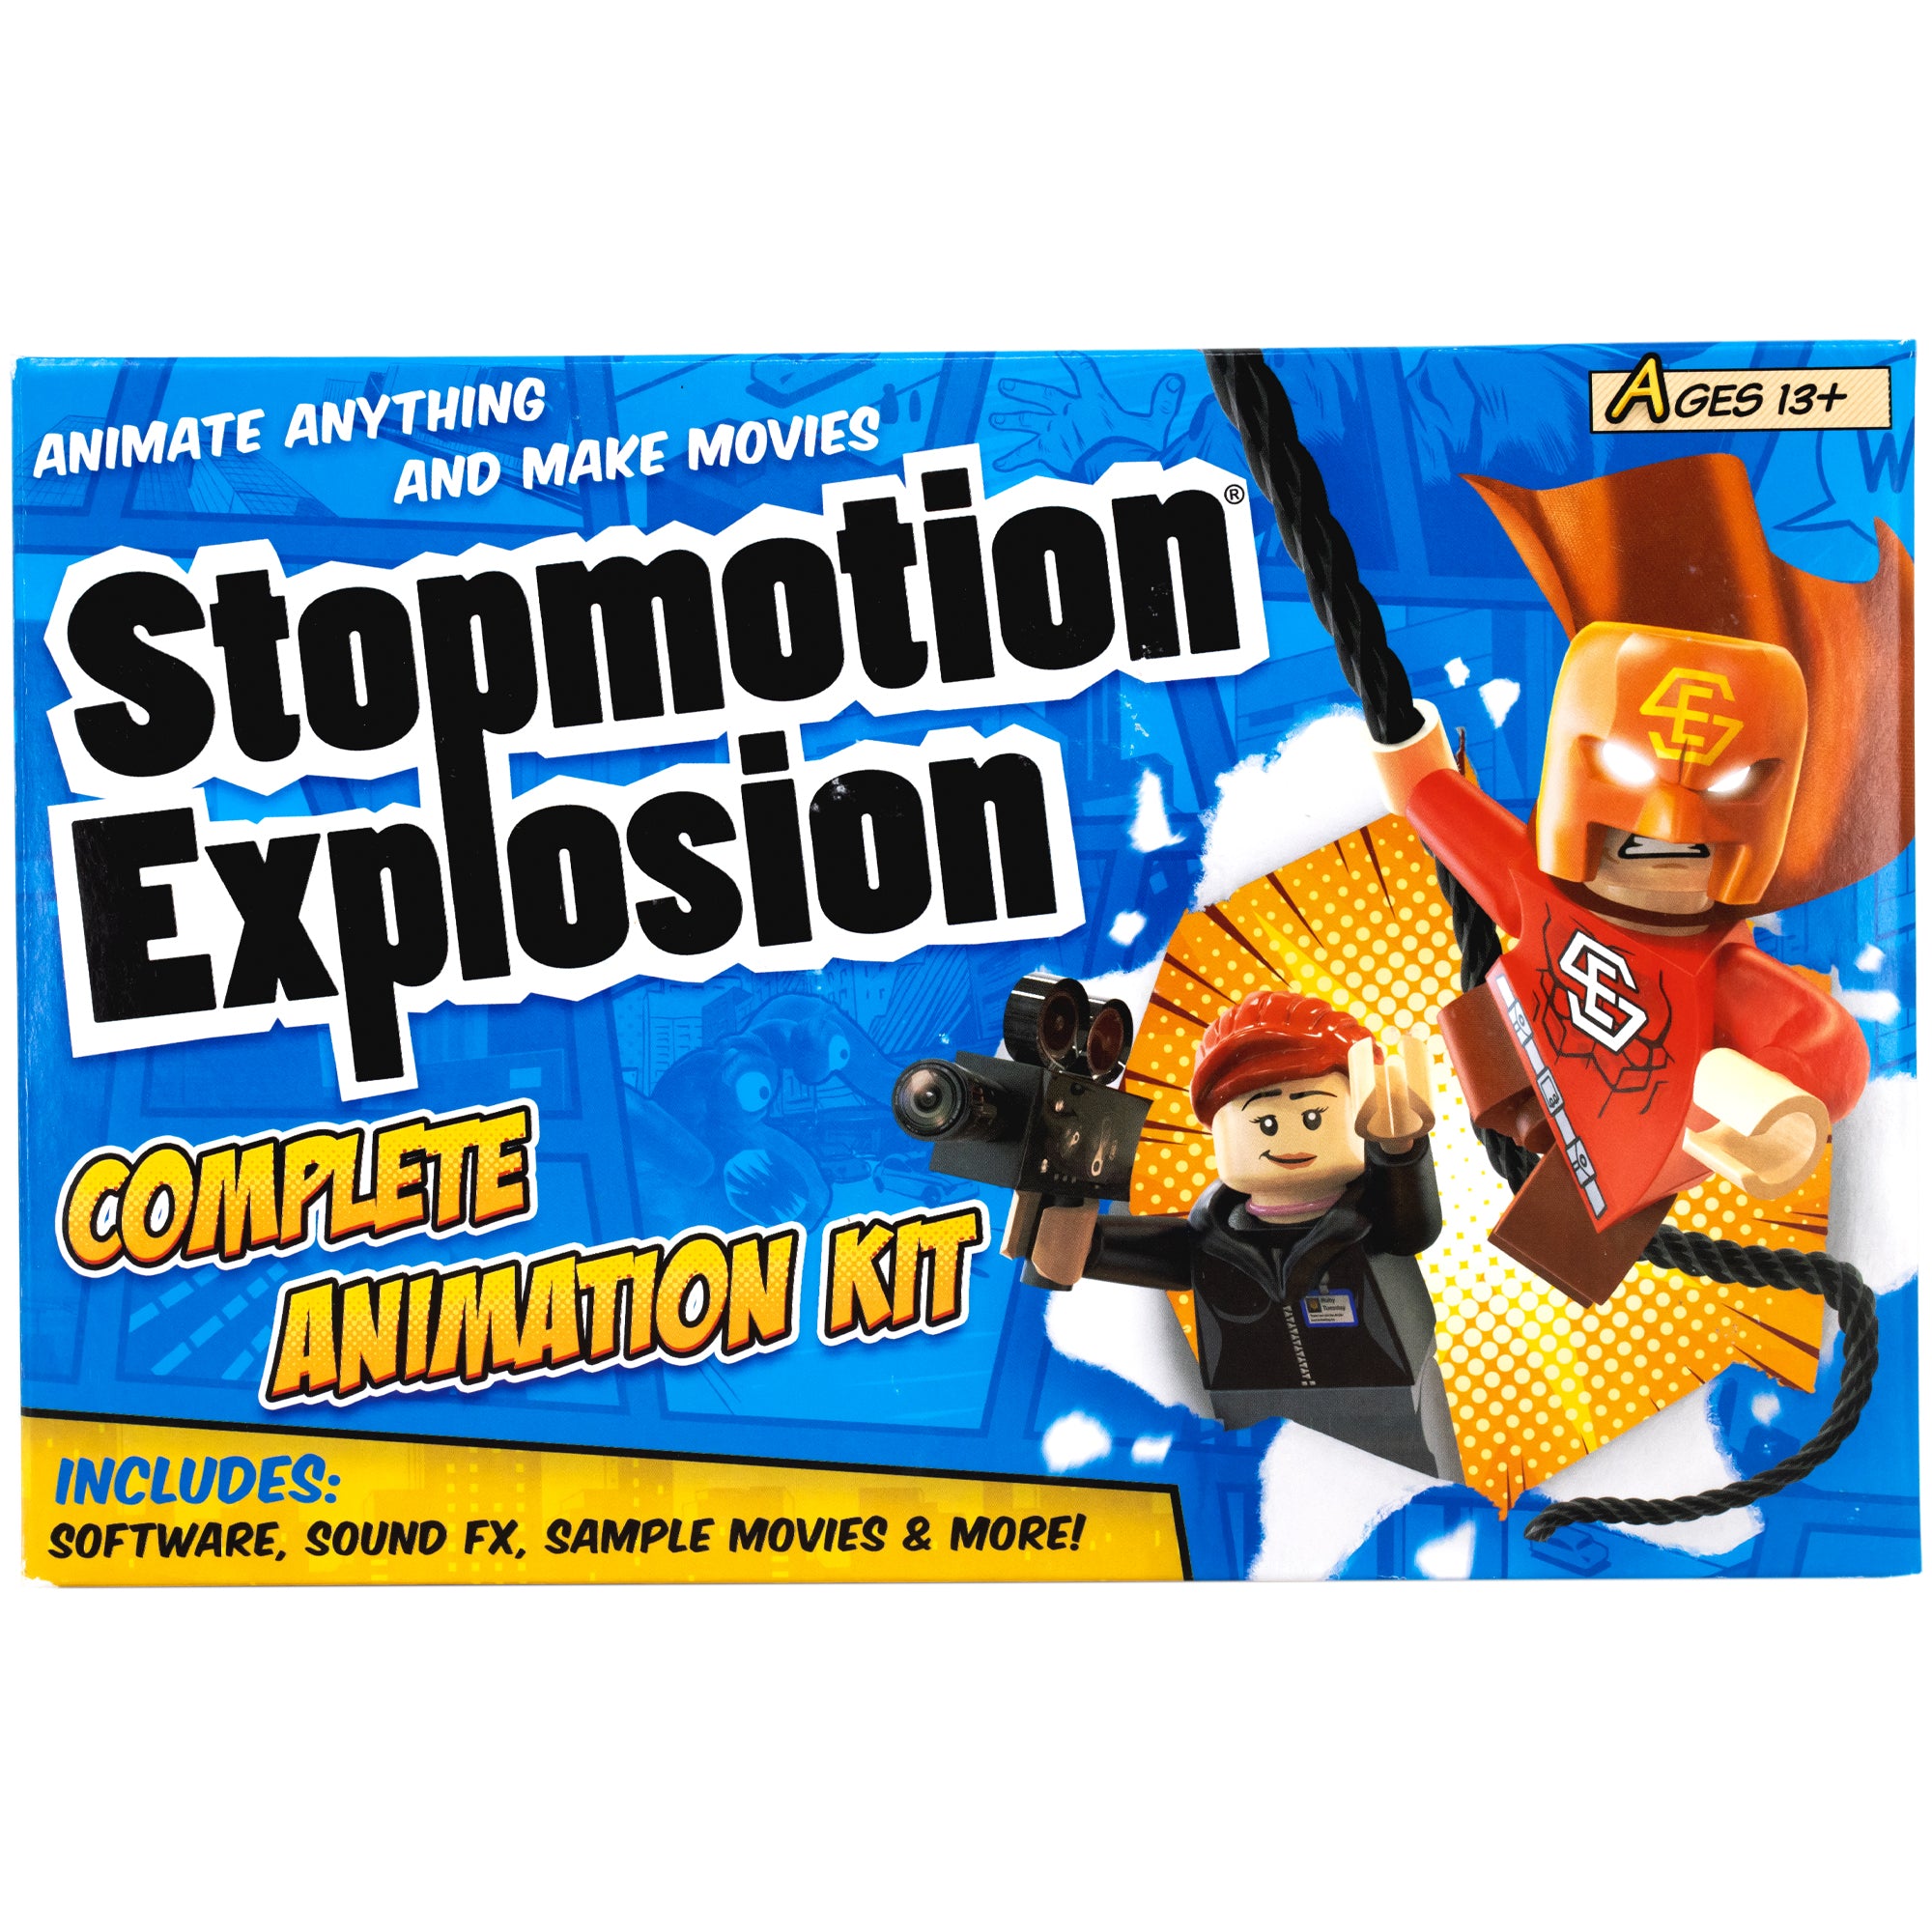 Stopmotion Explosion Complete Animation Kit box. The box is mainly blue with comic book illustrations throughout. Under the title on the left is a yellow section with the following text: “includes software, sound F X, sample movies, and more.” To the right of the box is an explosion of 2 Lego characters tearing through the background. The male superhero, hanging from a rope, is wearing a red suit, cape, and orange helmet with glowing white eyes. The girl on the left is holding a movie camera.